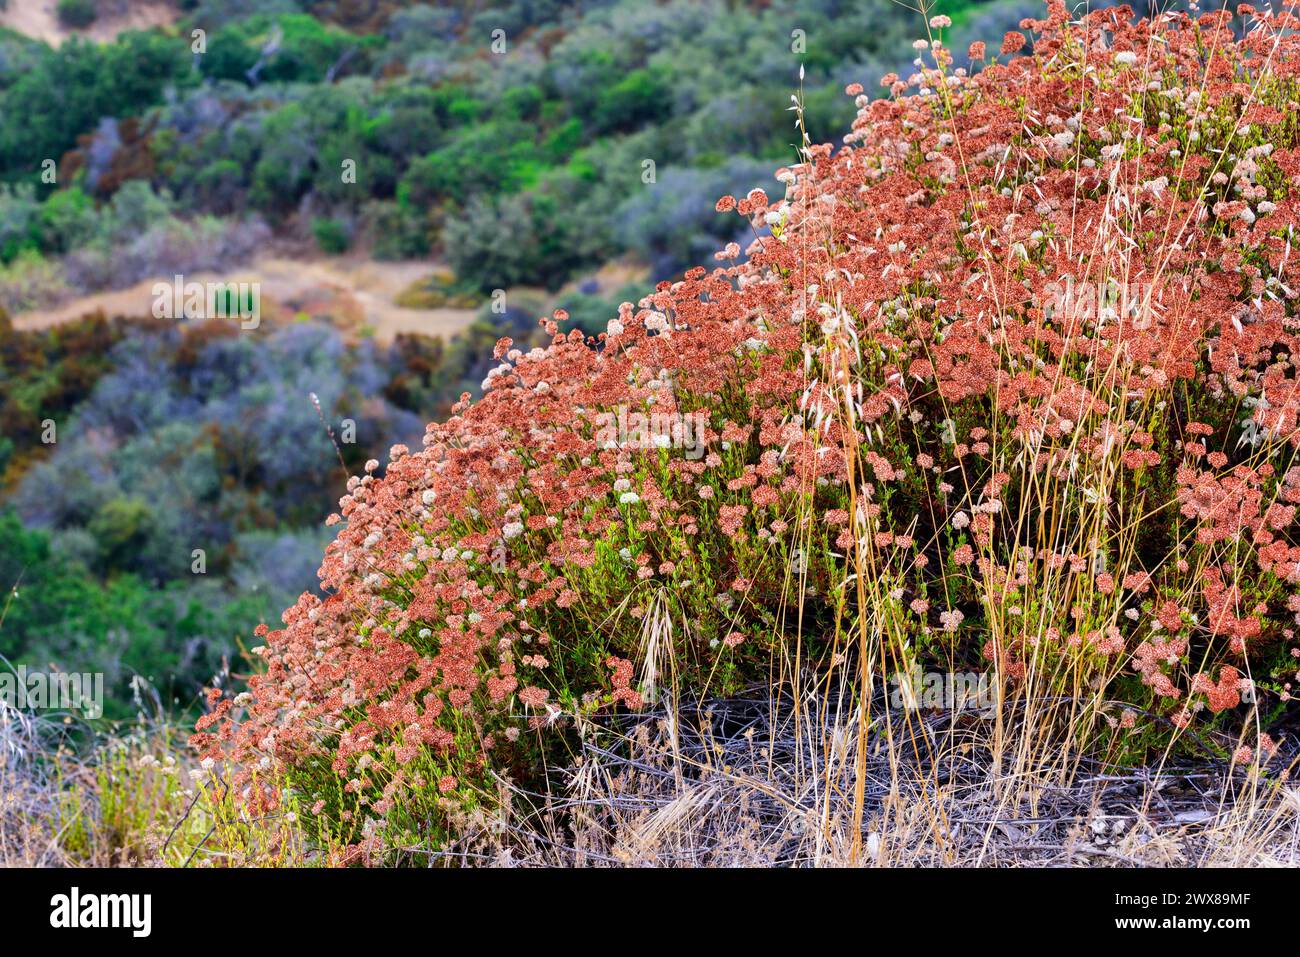 A shot of California Buckwheat with reddish coloring, taken on top of Inspiration Point at King Gillette Ranch in the Santa Monica Mountains in Calaba Stock Photo